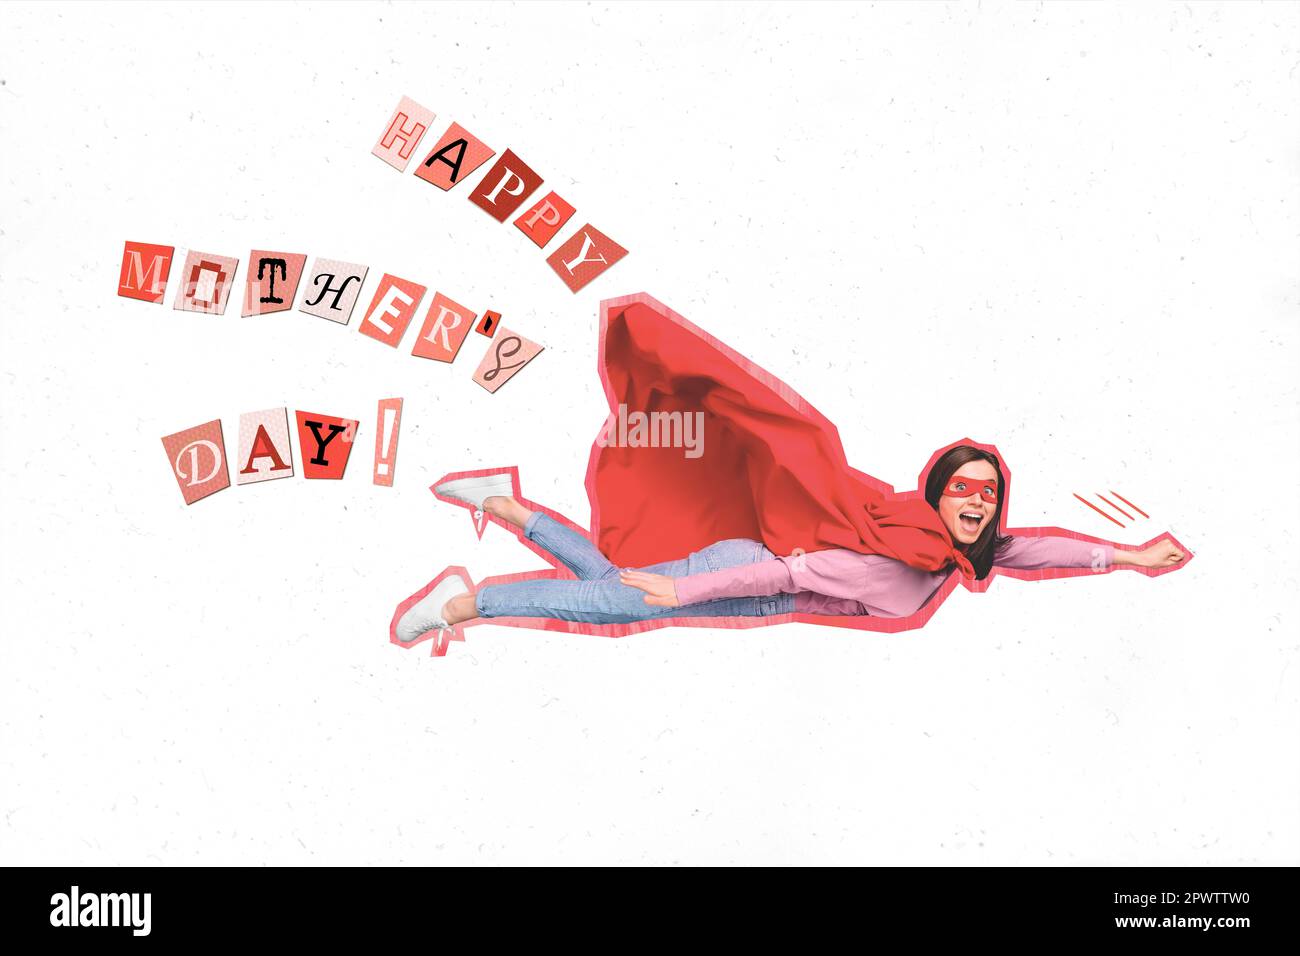 Adult young daughter wear superhero red carnival costume flying rushing to greet her aged mom mother day visit home collage Stock Photo